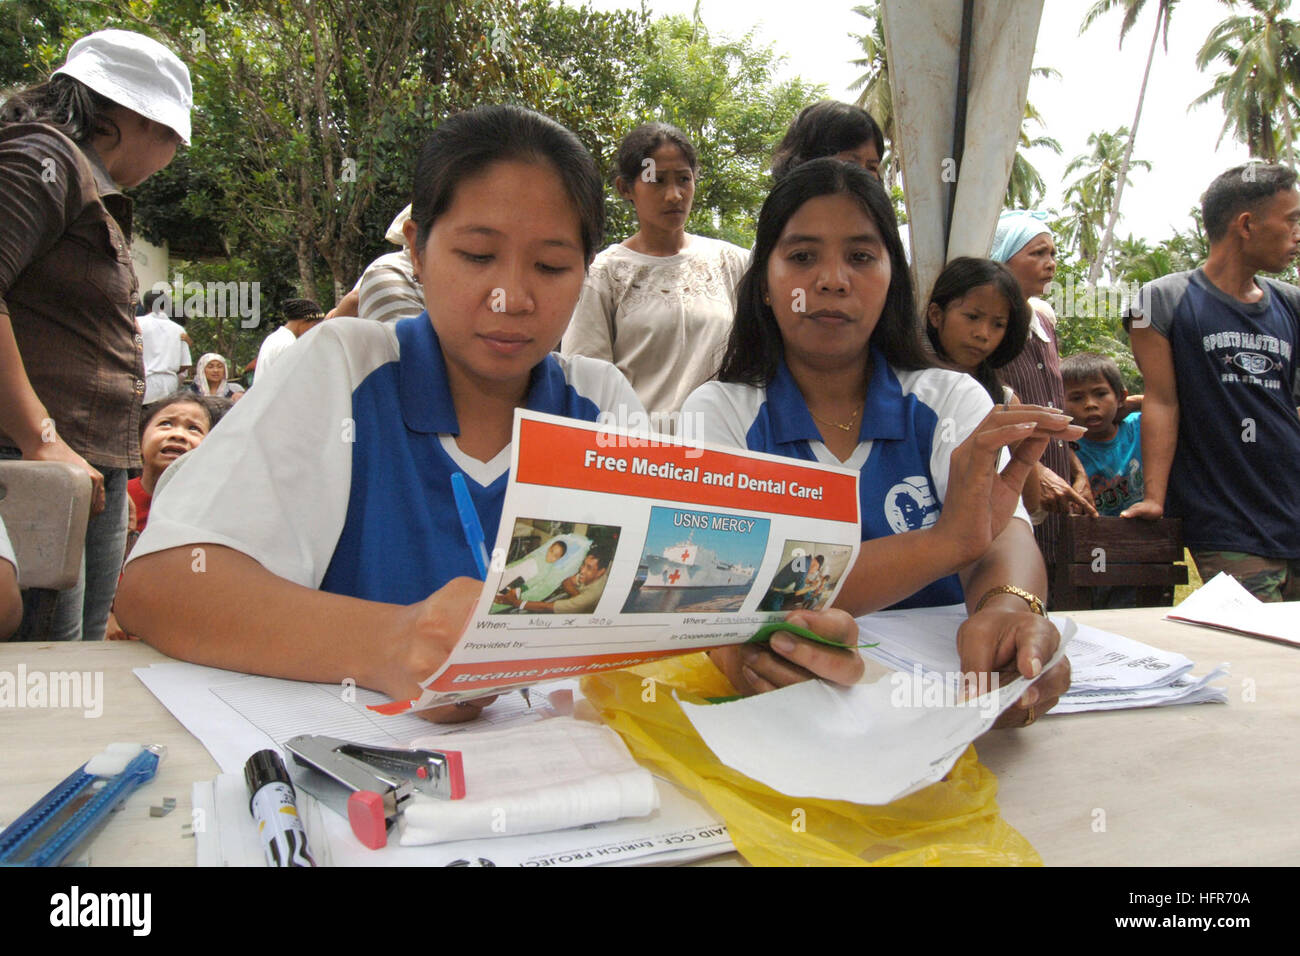 060529-N-6501M-012 Isabella, Republic of the Philippines - (May 29, 2006) - Local Filipino volunteers prepare the necessary paperwork needed to participate in a Medical Civil Action Program (MEDCAP) located on Basilan Island, just south of Zamboanga City.  Medical and dental services are being provided by doctors and staff from the U.S. Military Sealift Command (MSC) hospital ship, USNS Mercy (T-AH 19), together with non-governmental organizations.  MEDCAPs are an integral part of Mercy's humanitarian mission and provide a multitude of medical, dental and veterinary care for the people who liv Stock Photo